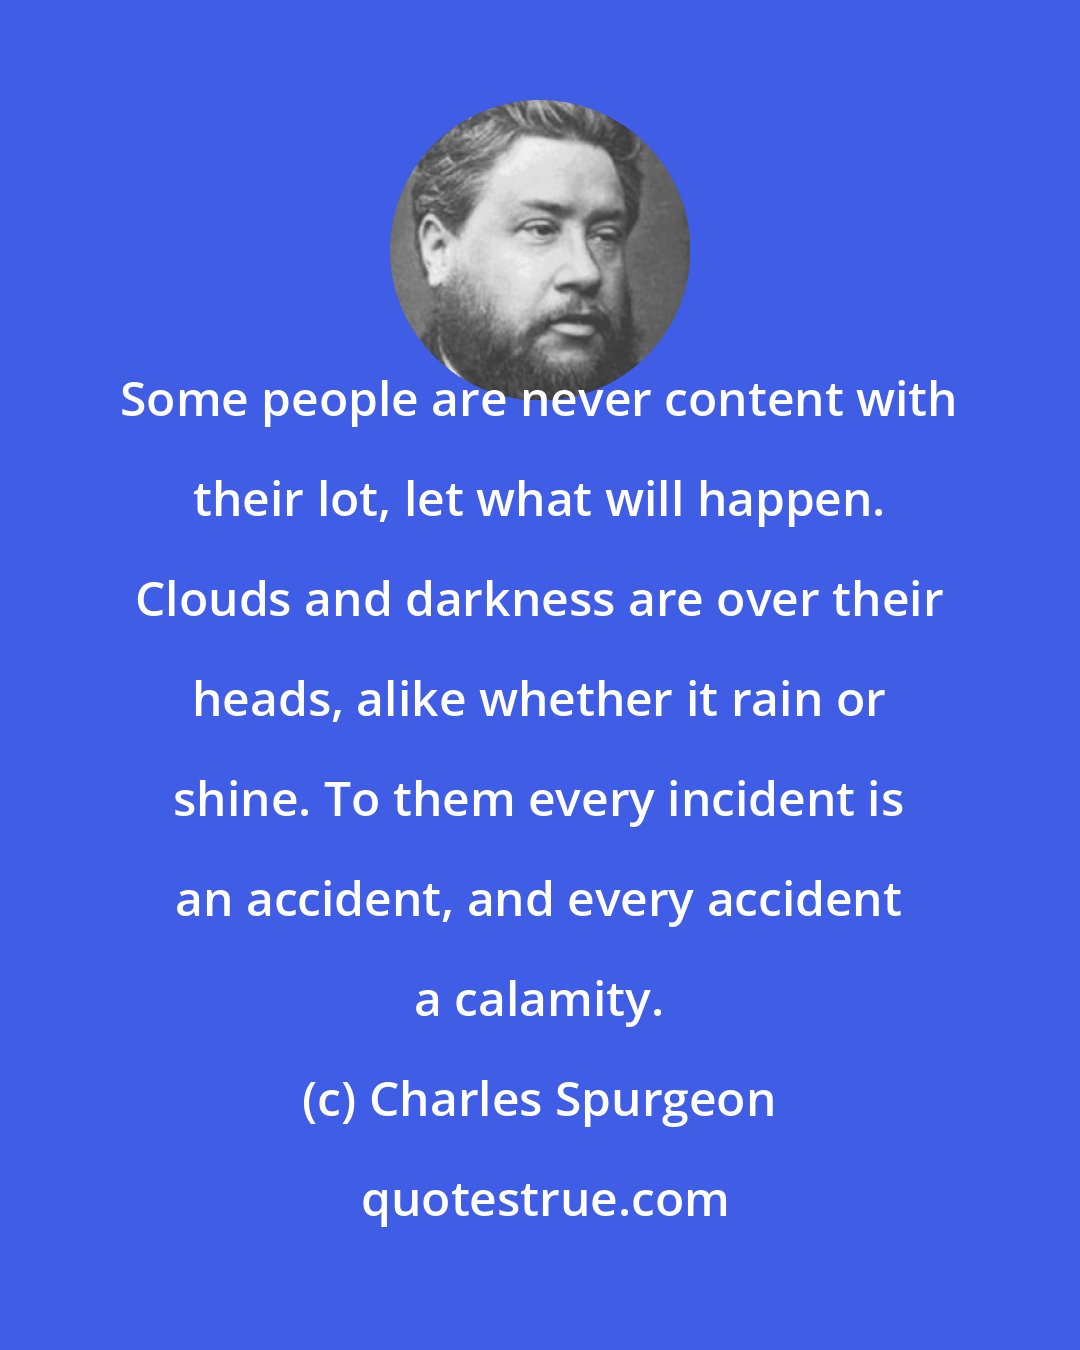 Charles Spurgeon: Some people are never content with their lot, let what will happen. Clouds and darkness are over their heads, alike whether it rain or shine. To them every incident is an accident, and every accident a calamity.